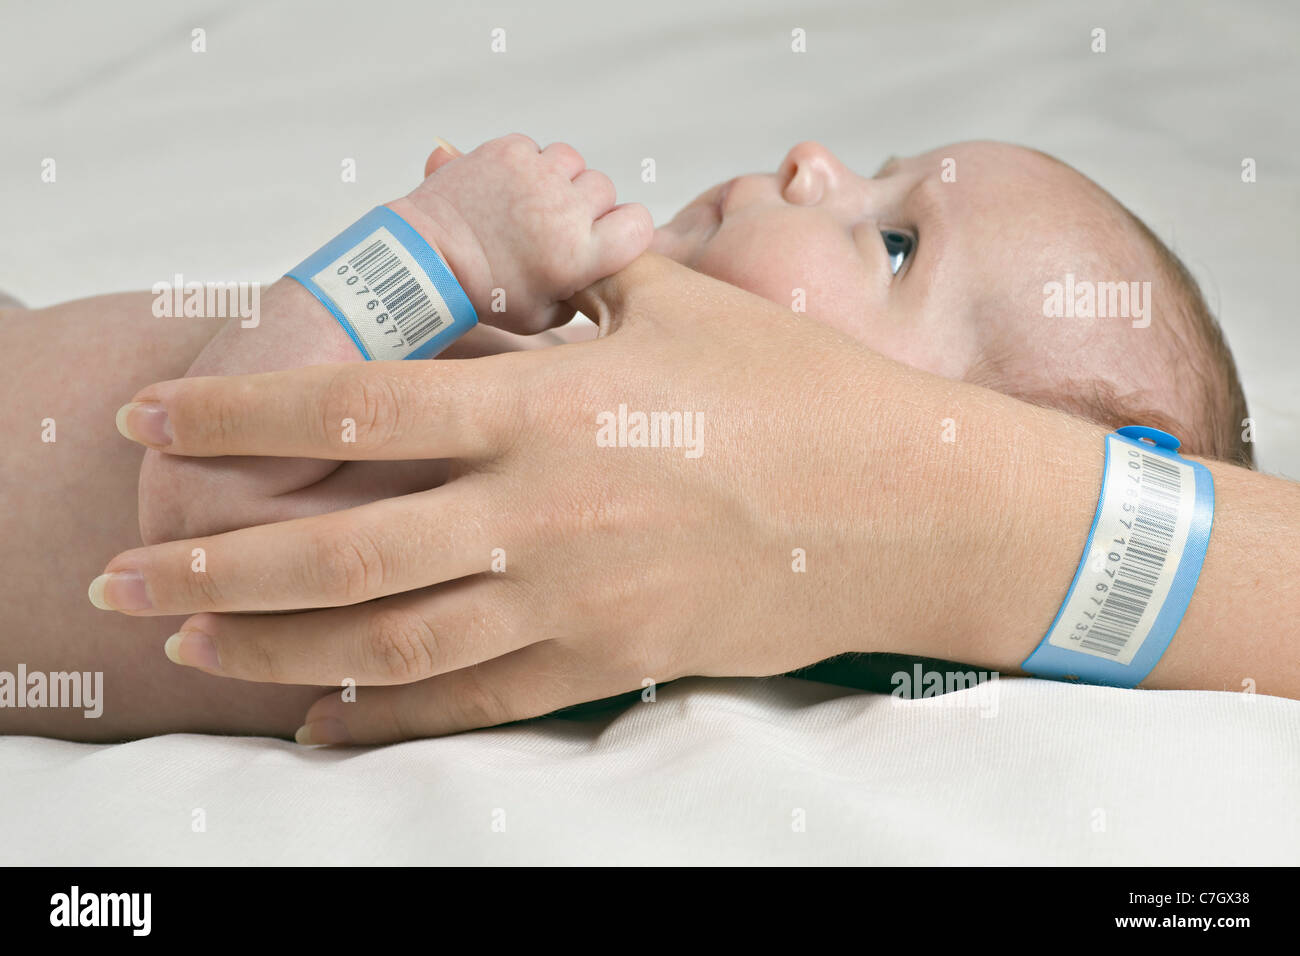 A baby holding her mother's thumb, both wearing hospital ID bracelets Stock Photo